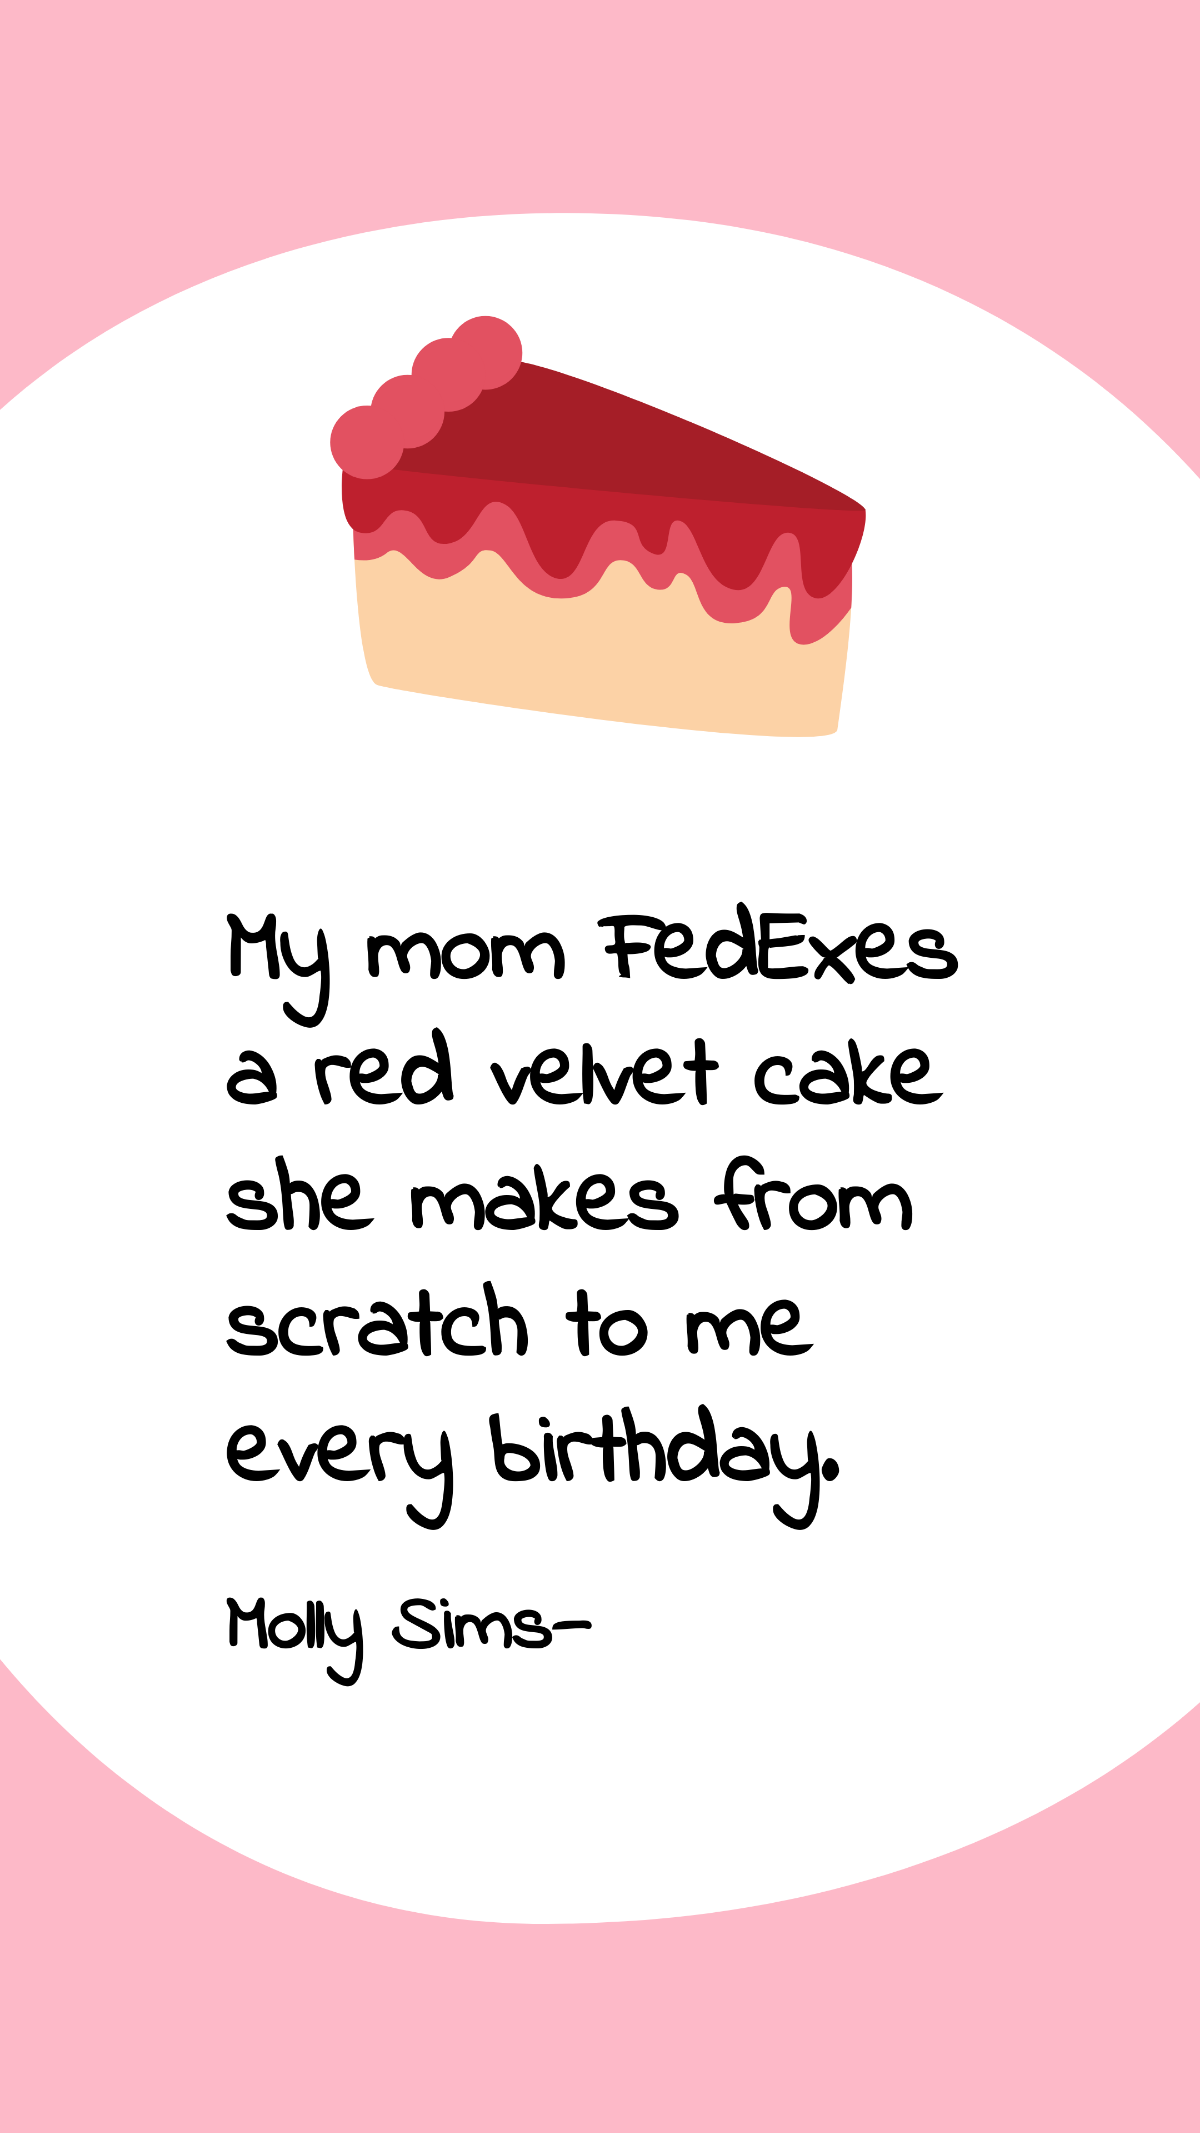 Molly Sims - My mom FedExes a red velvet cake she makes from scratch to me every birthday.